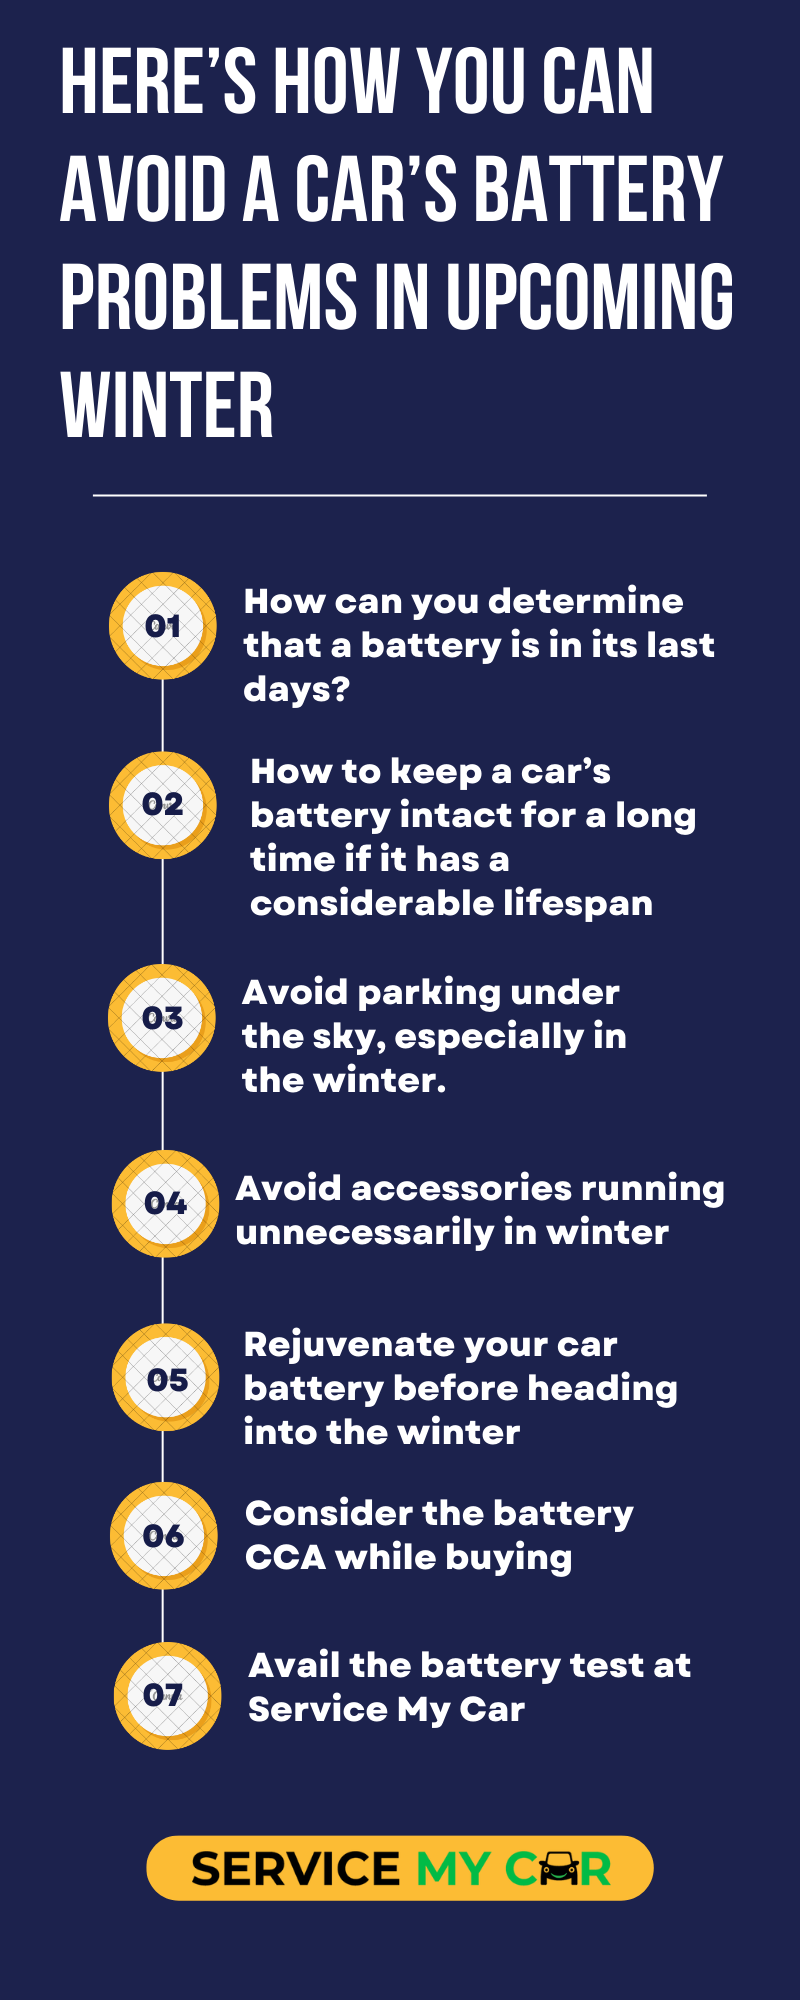 Here’s how you can avoid A Car’s Battery Problems in Upcoming Winter